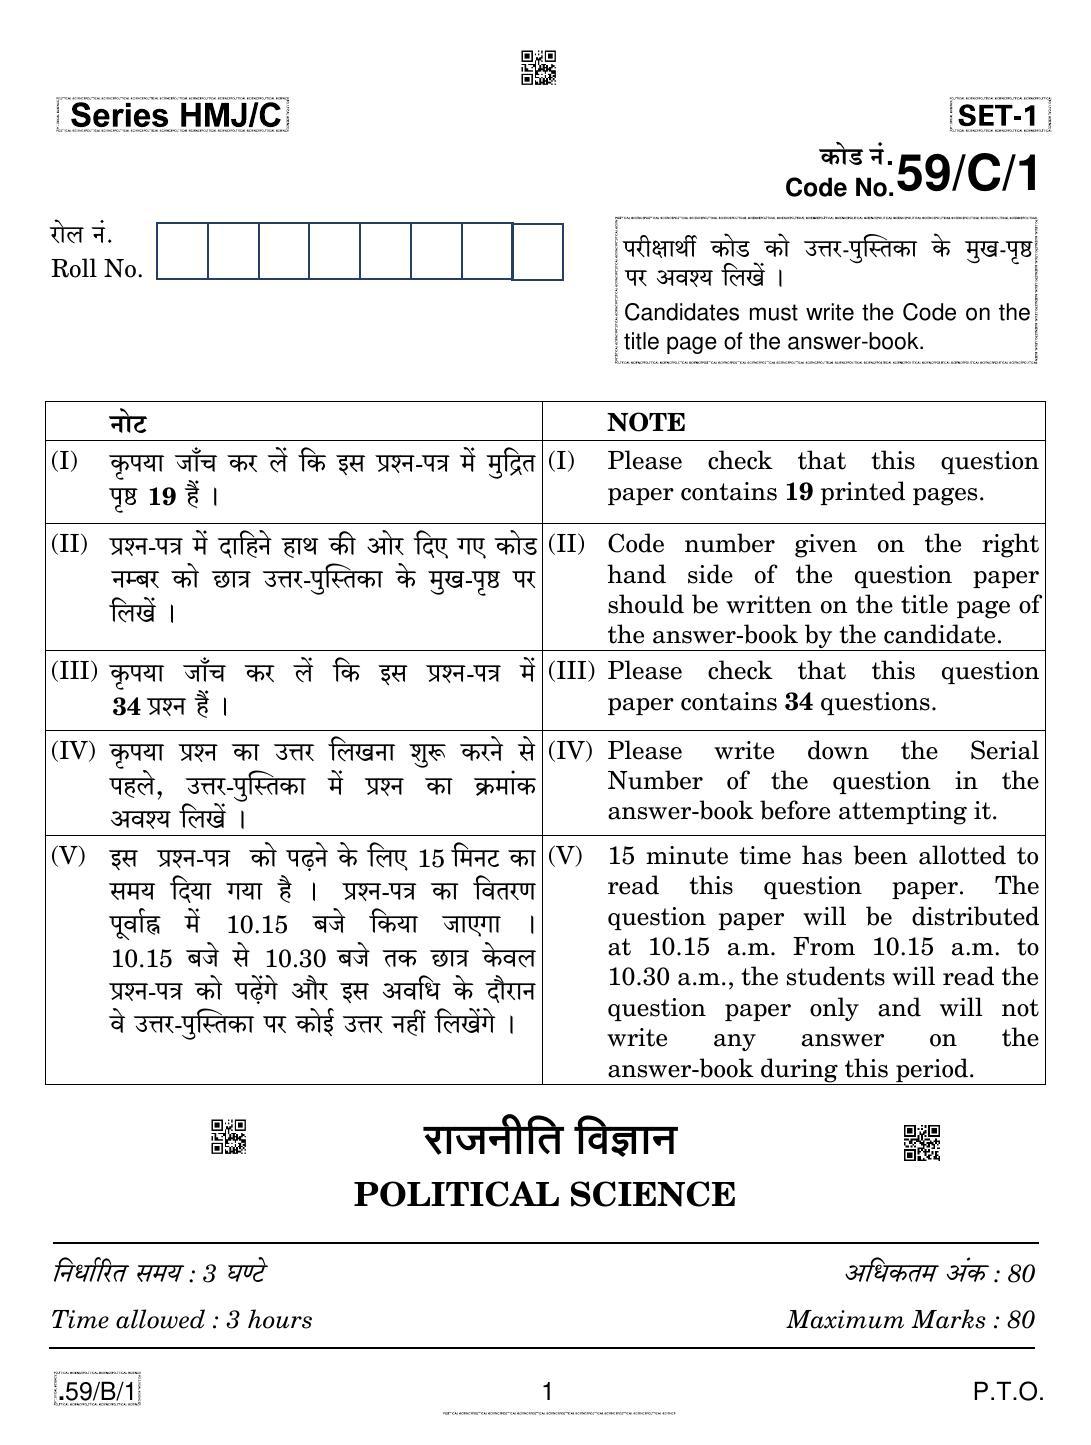 CBSE Class 12 59-C-1 - Political Science 2020 Compartment Question Paper - Page 1